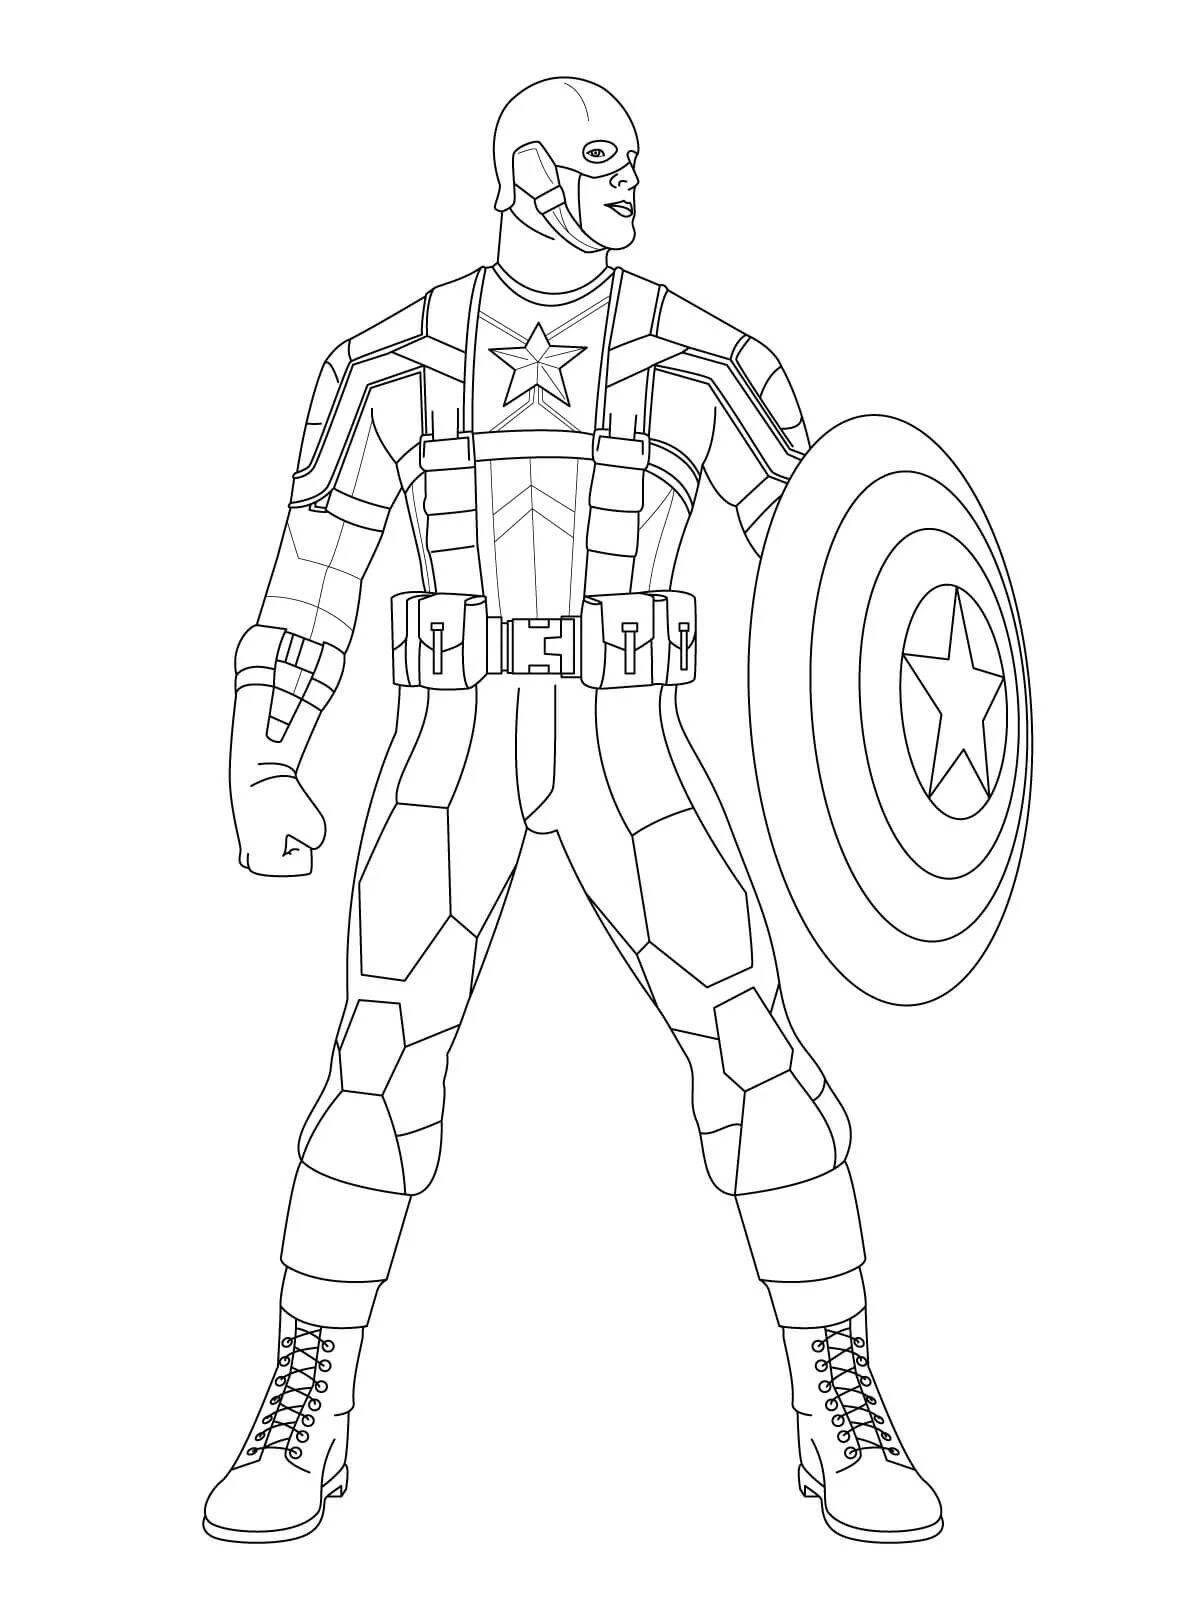 Majestic captain america coloring pages for boys